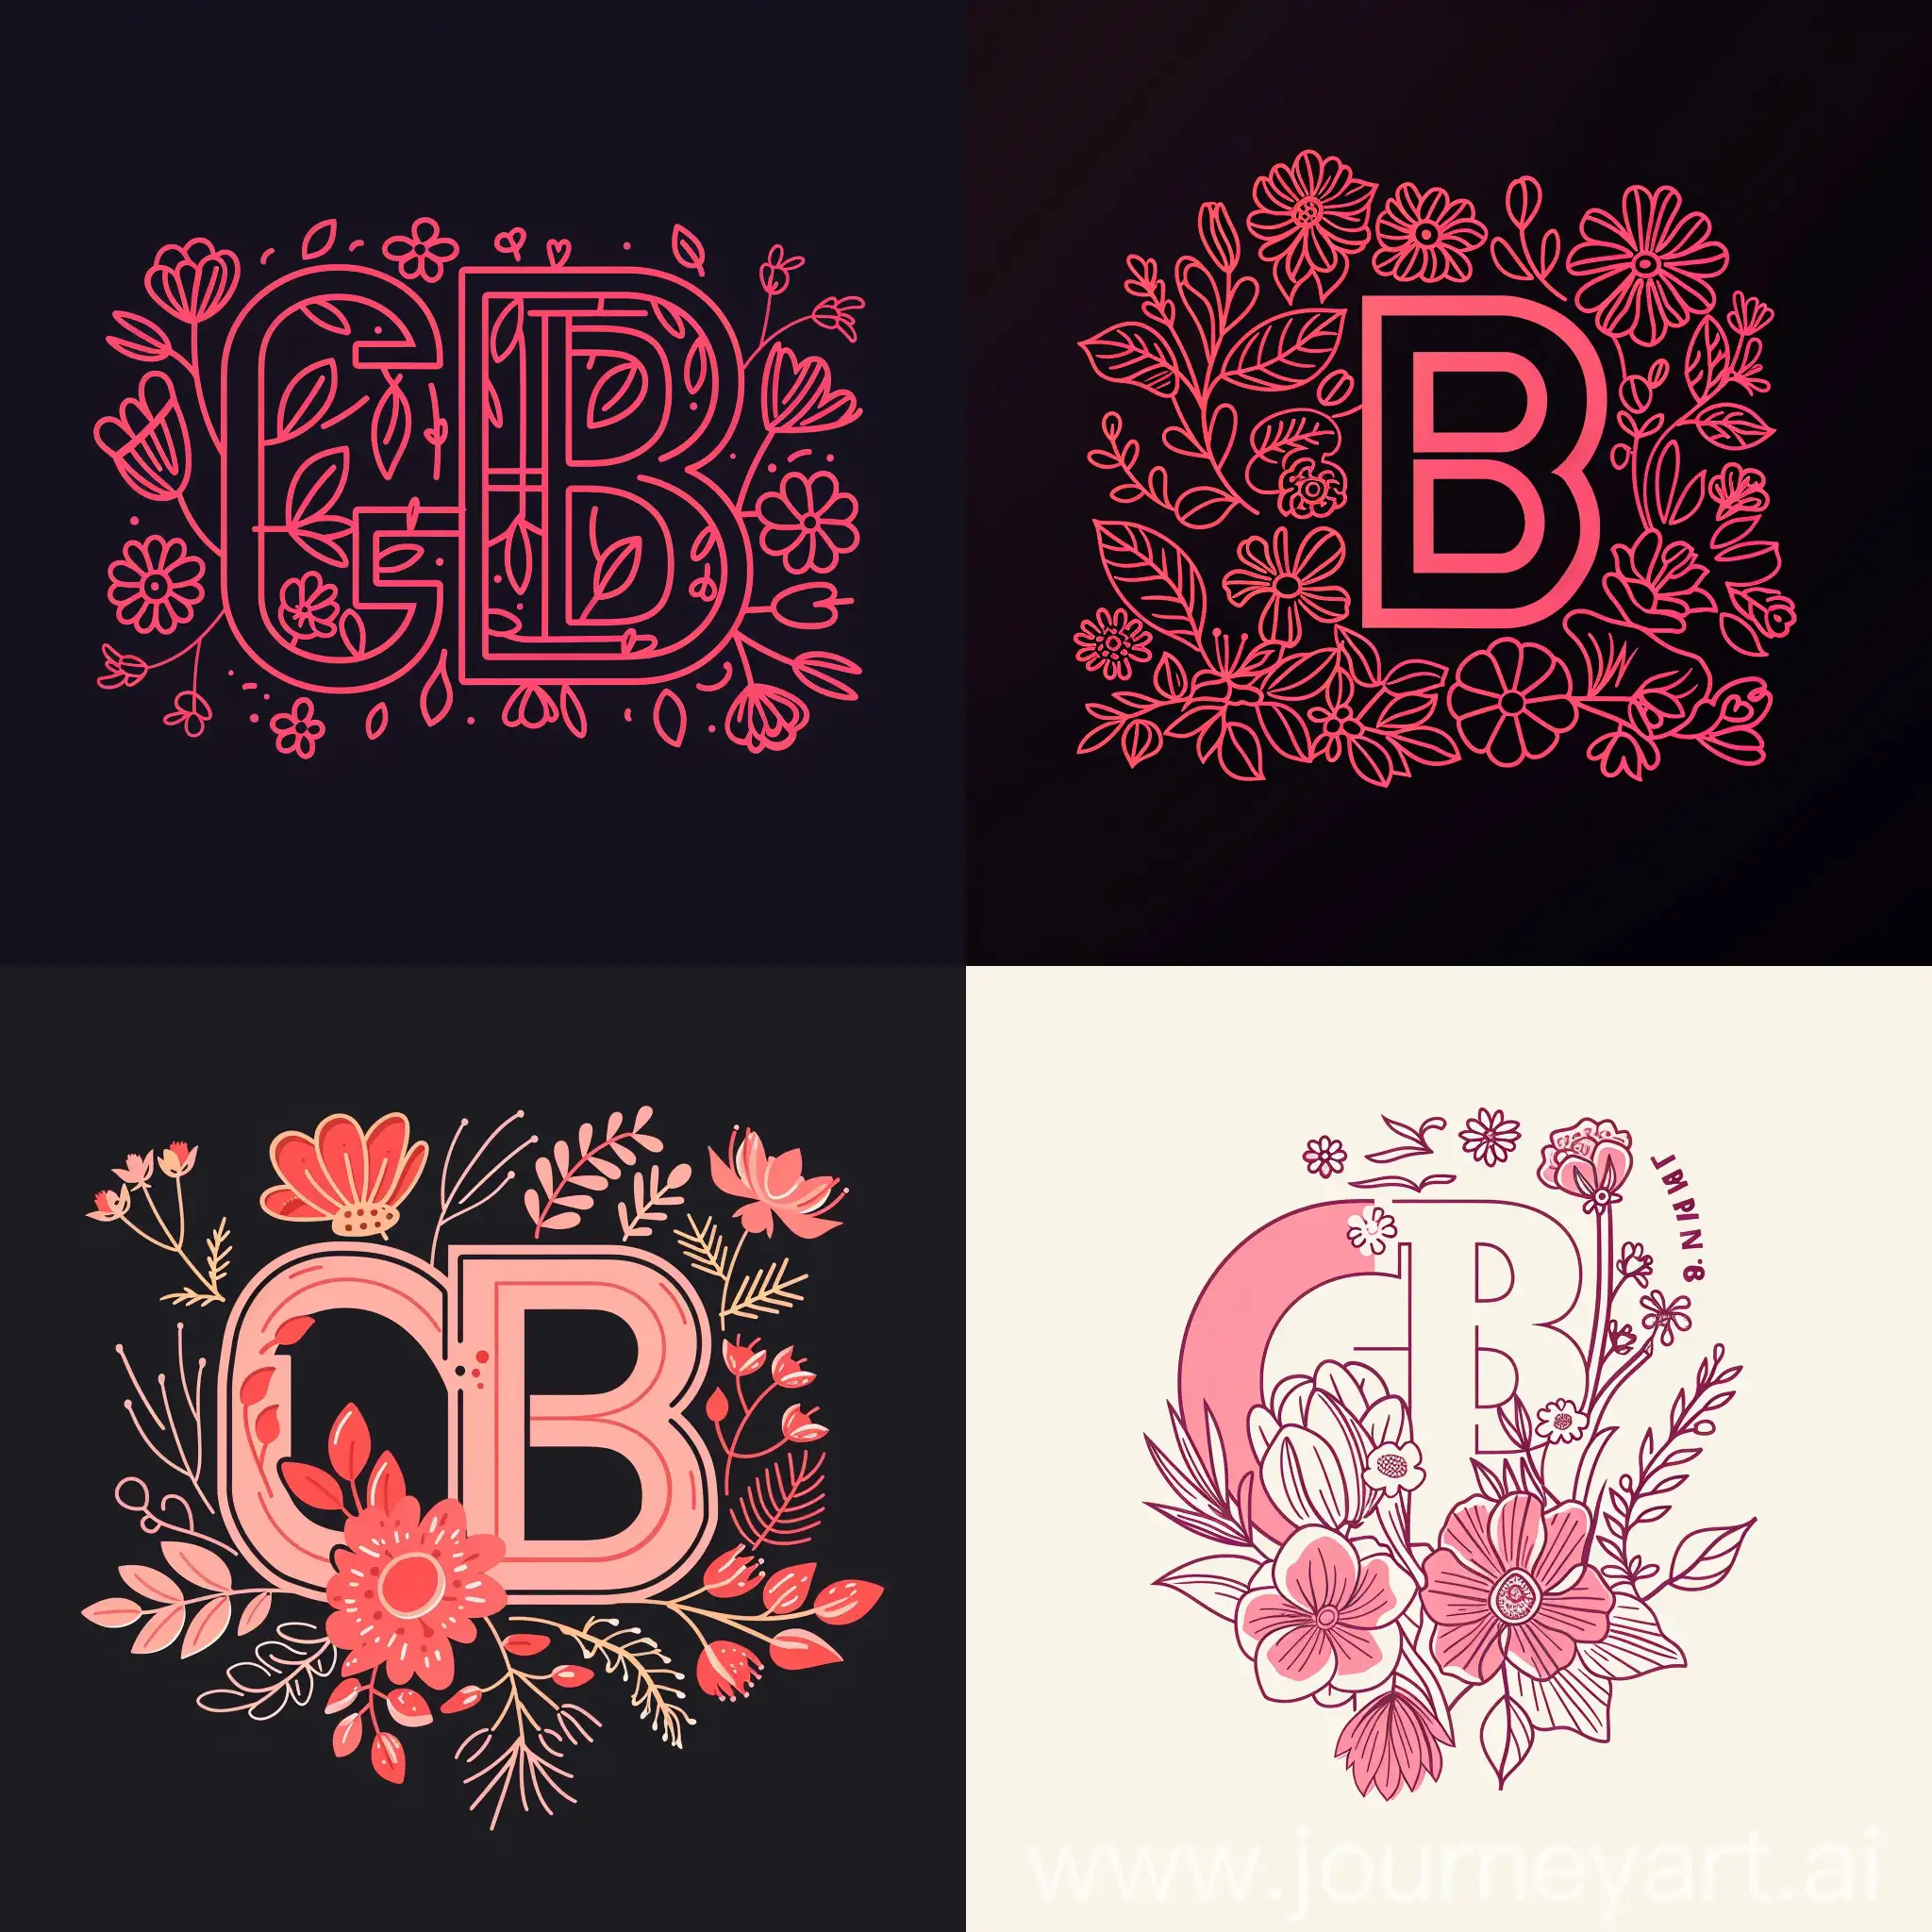 High resolution vector of a linear logo for a flower shop called GB, which has the shape of GB written in pink combined with flowers